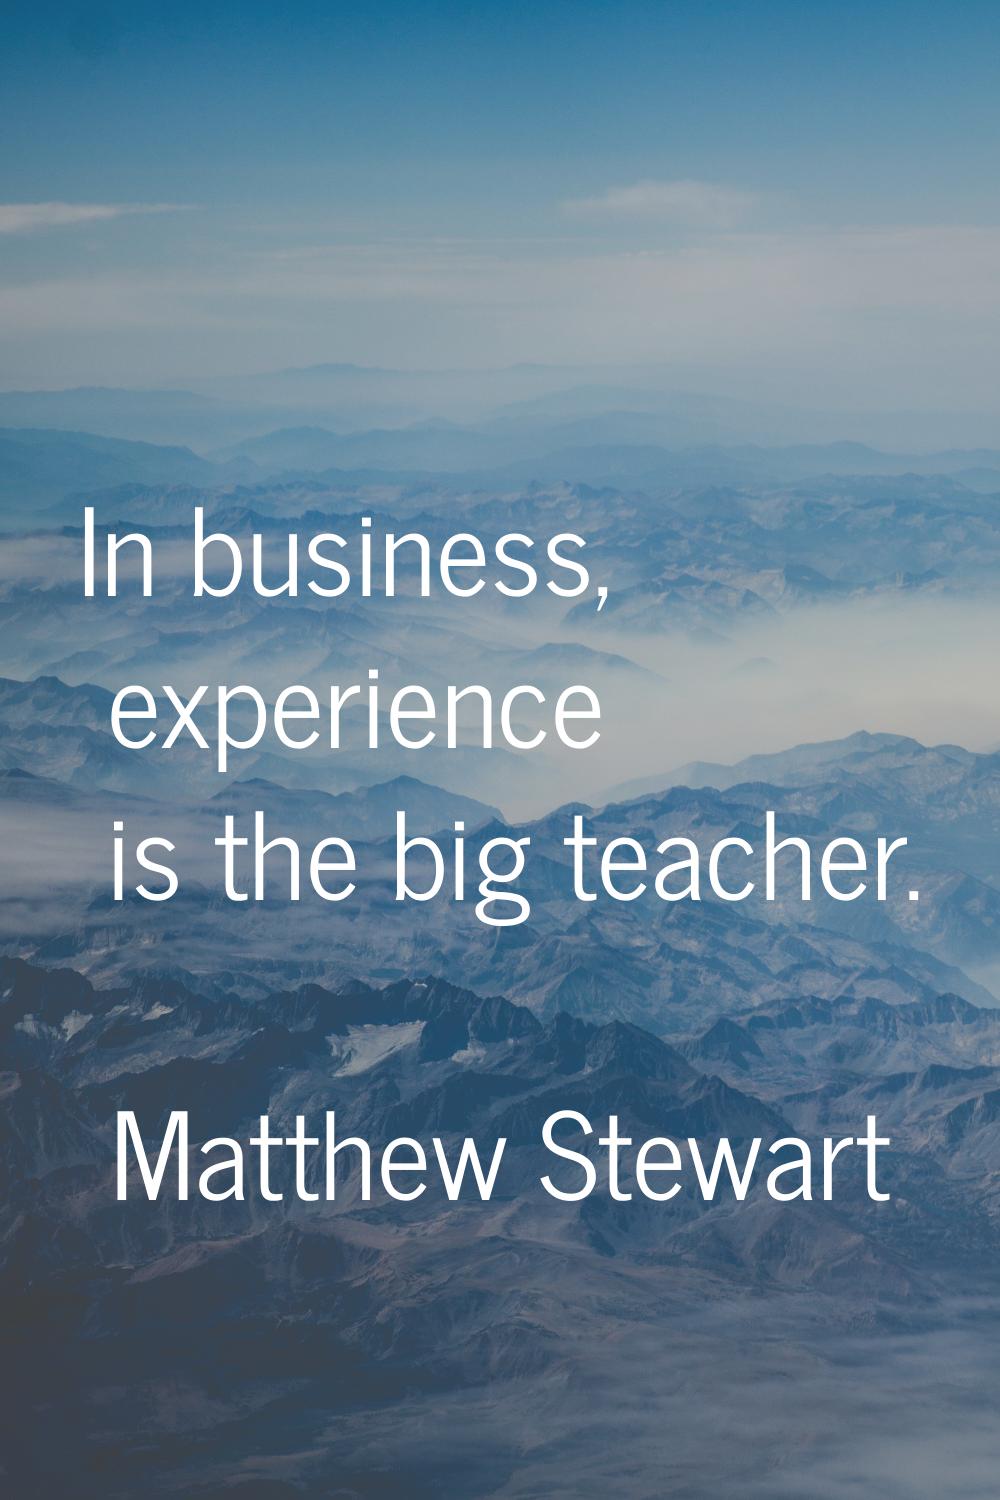 In business, experience is the big teacher.